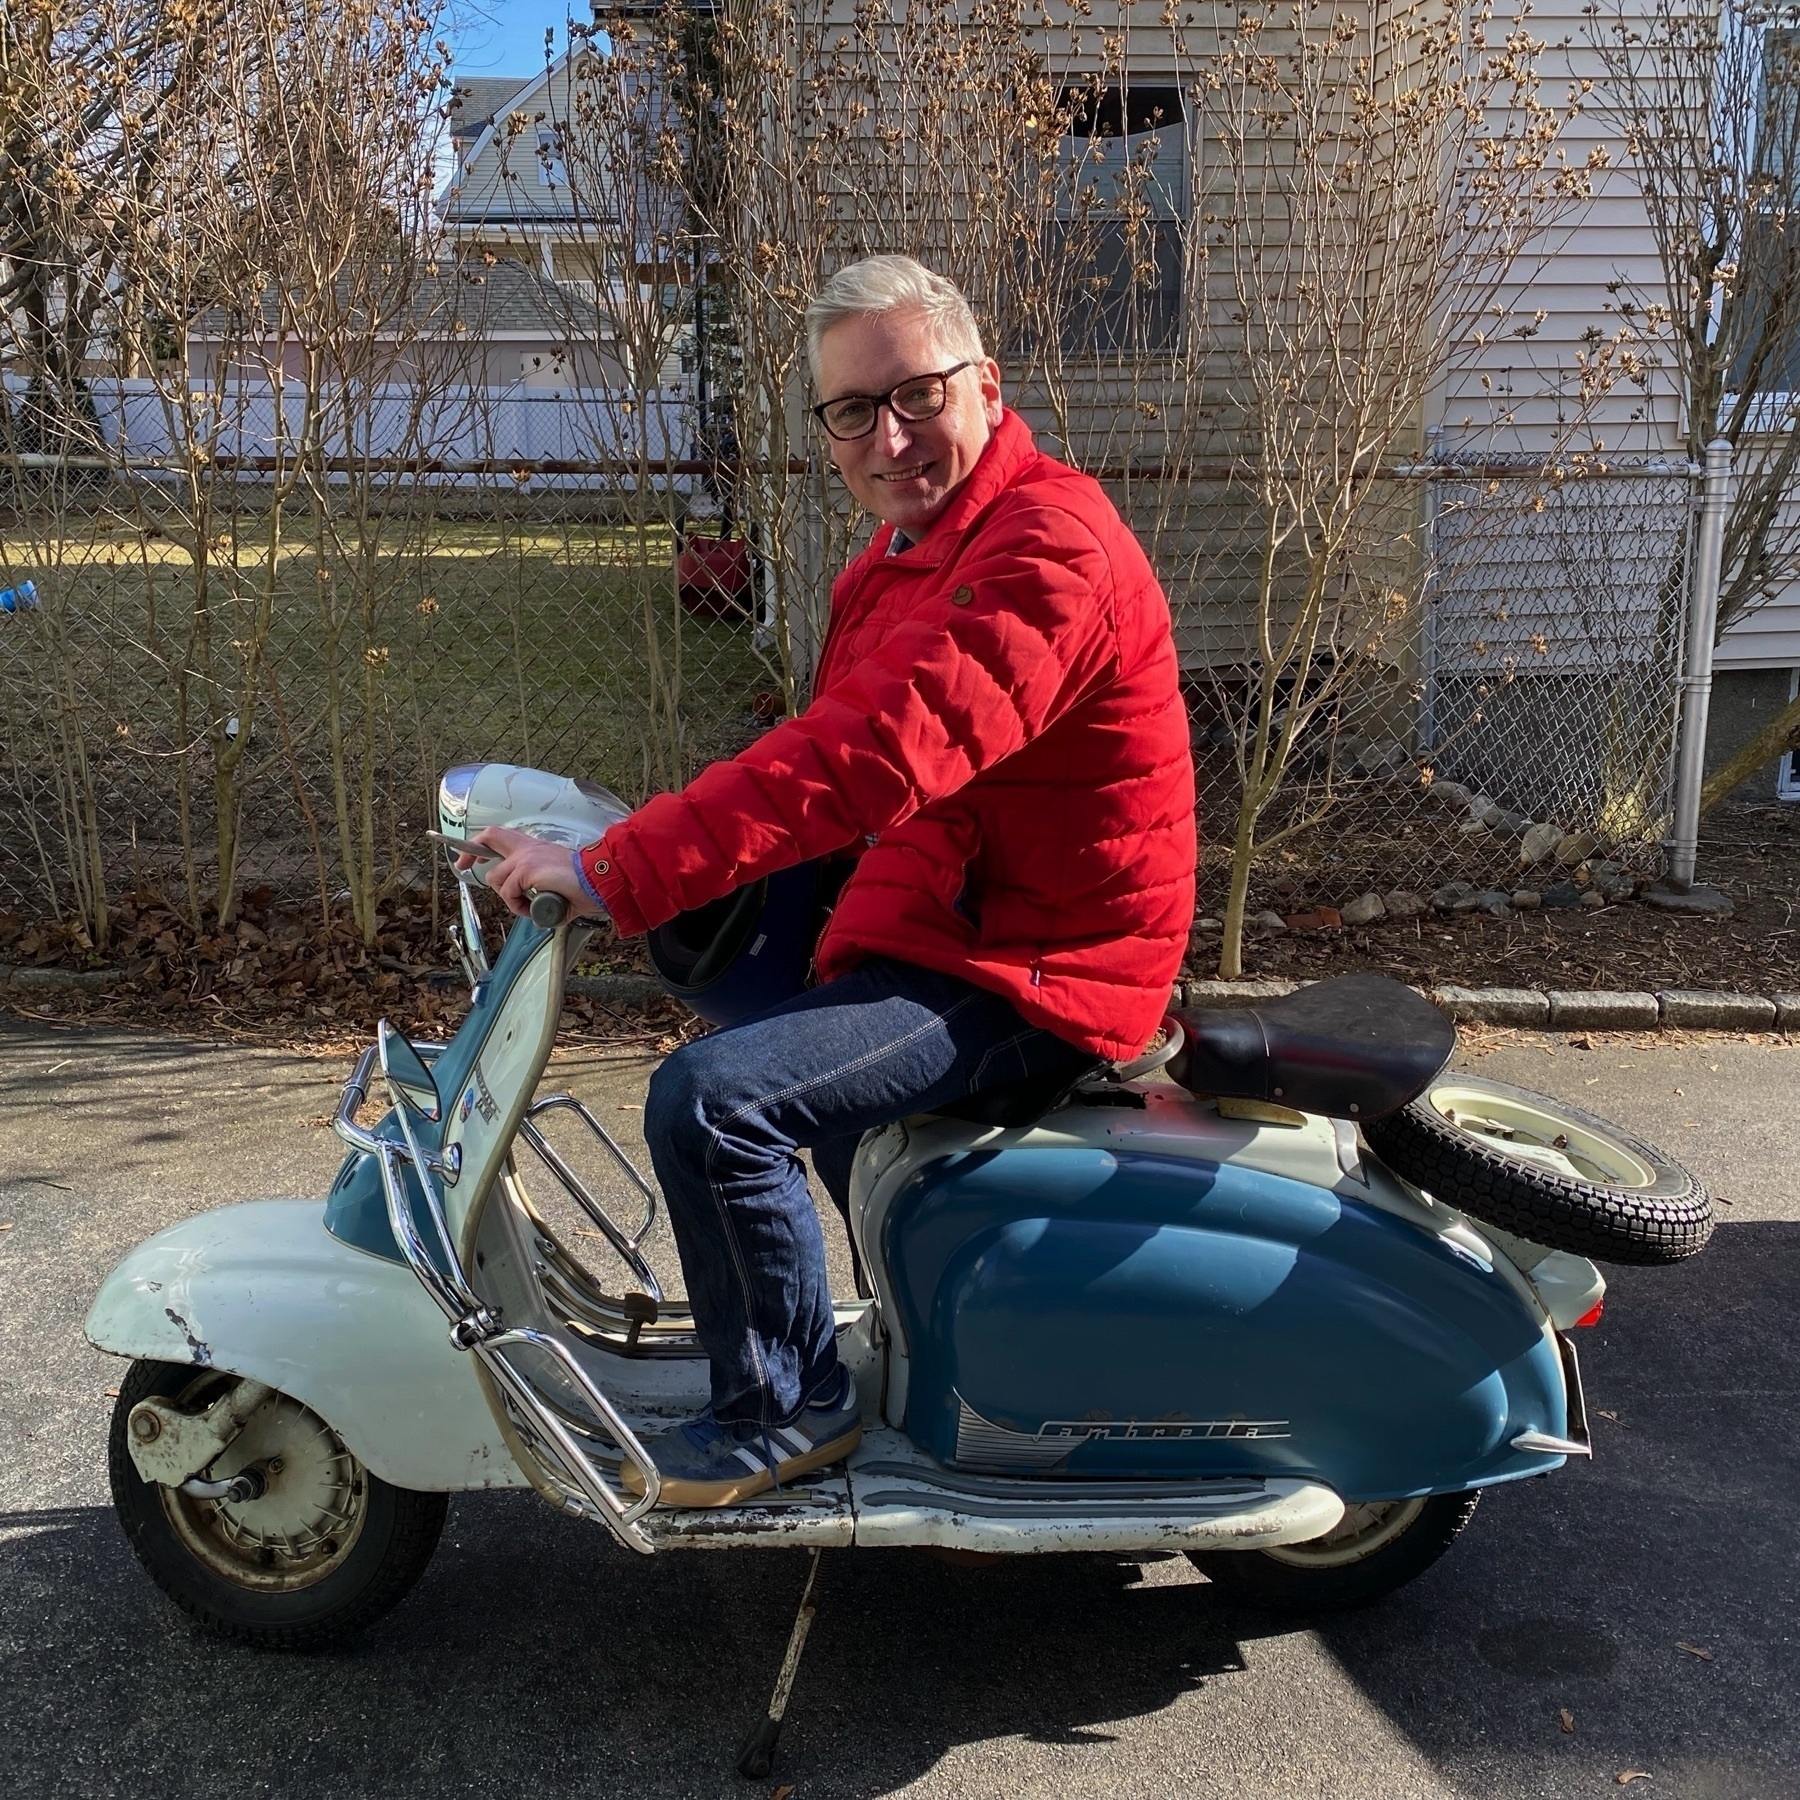 Caucasian man with grey hair wearing a red, puffy jack, sitting on a classic Lambretta motorcycle with blue and white trim.